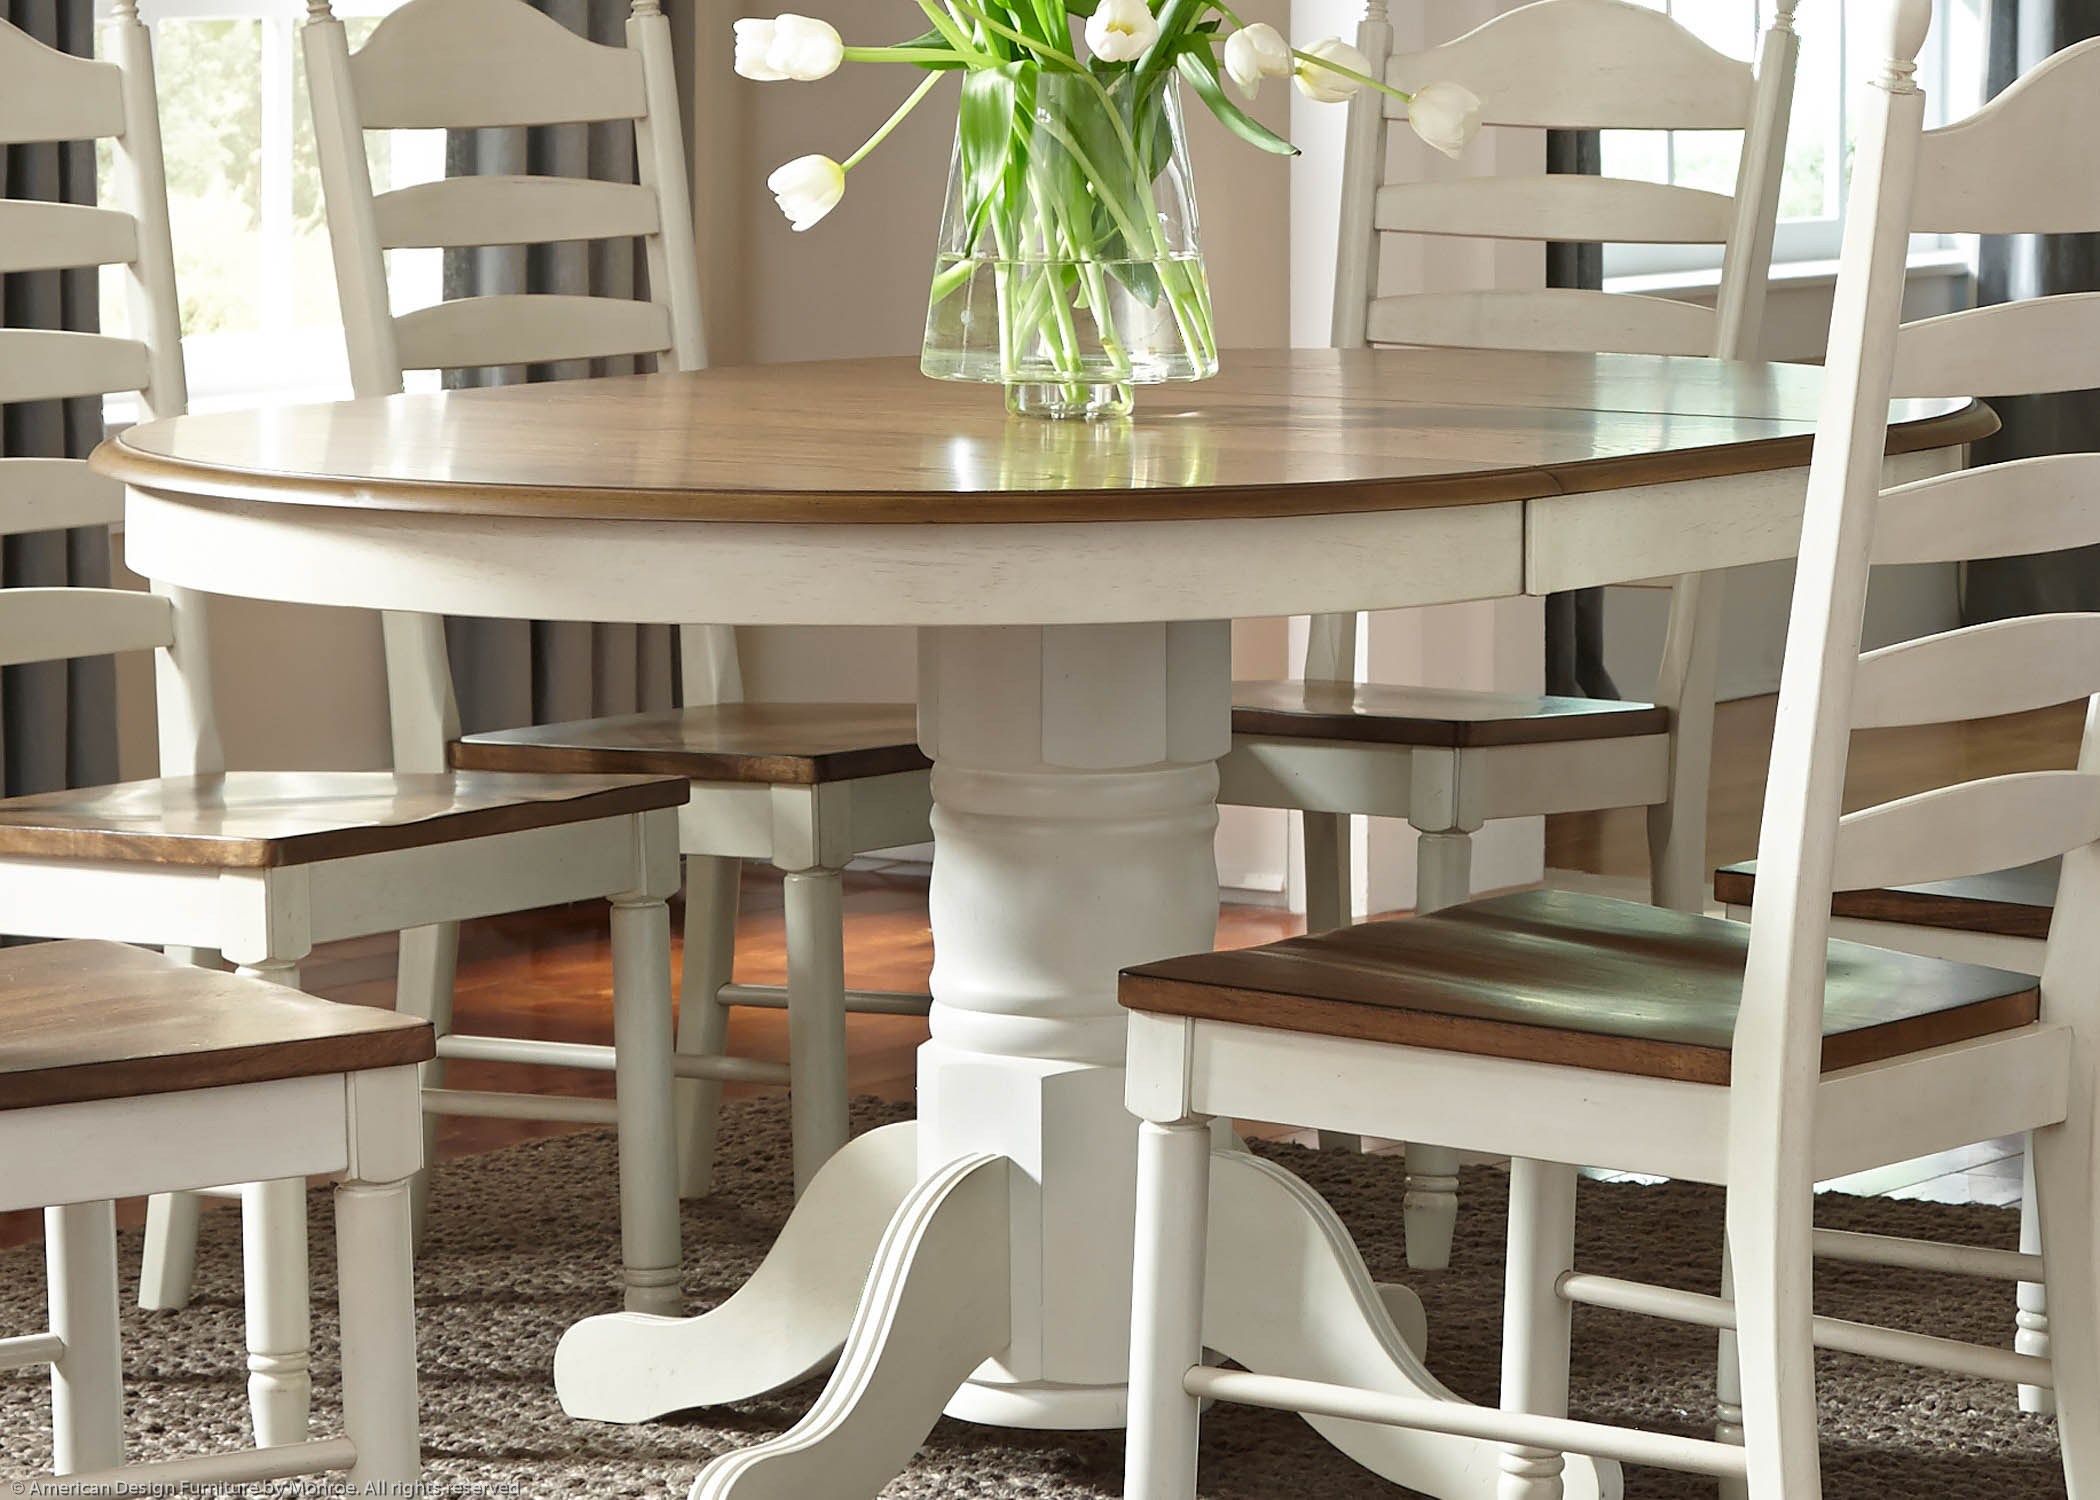 Enfield Casual Table Pic 1 (Heading Pedestal Table)